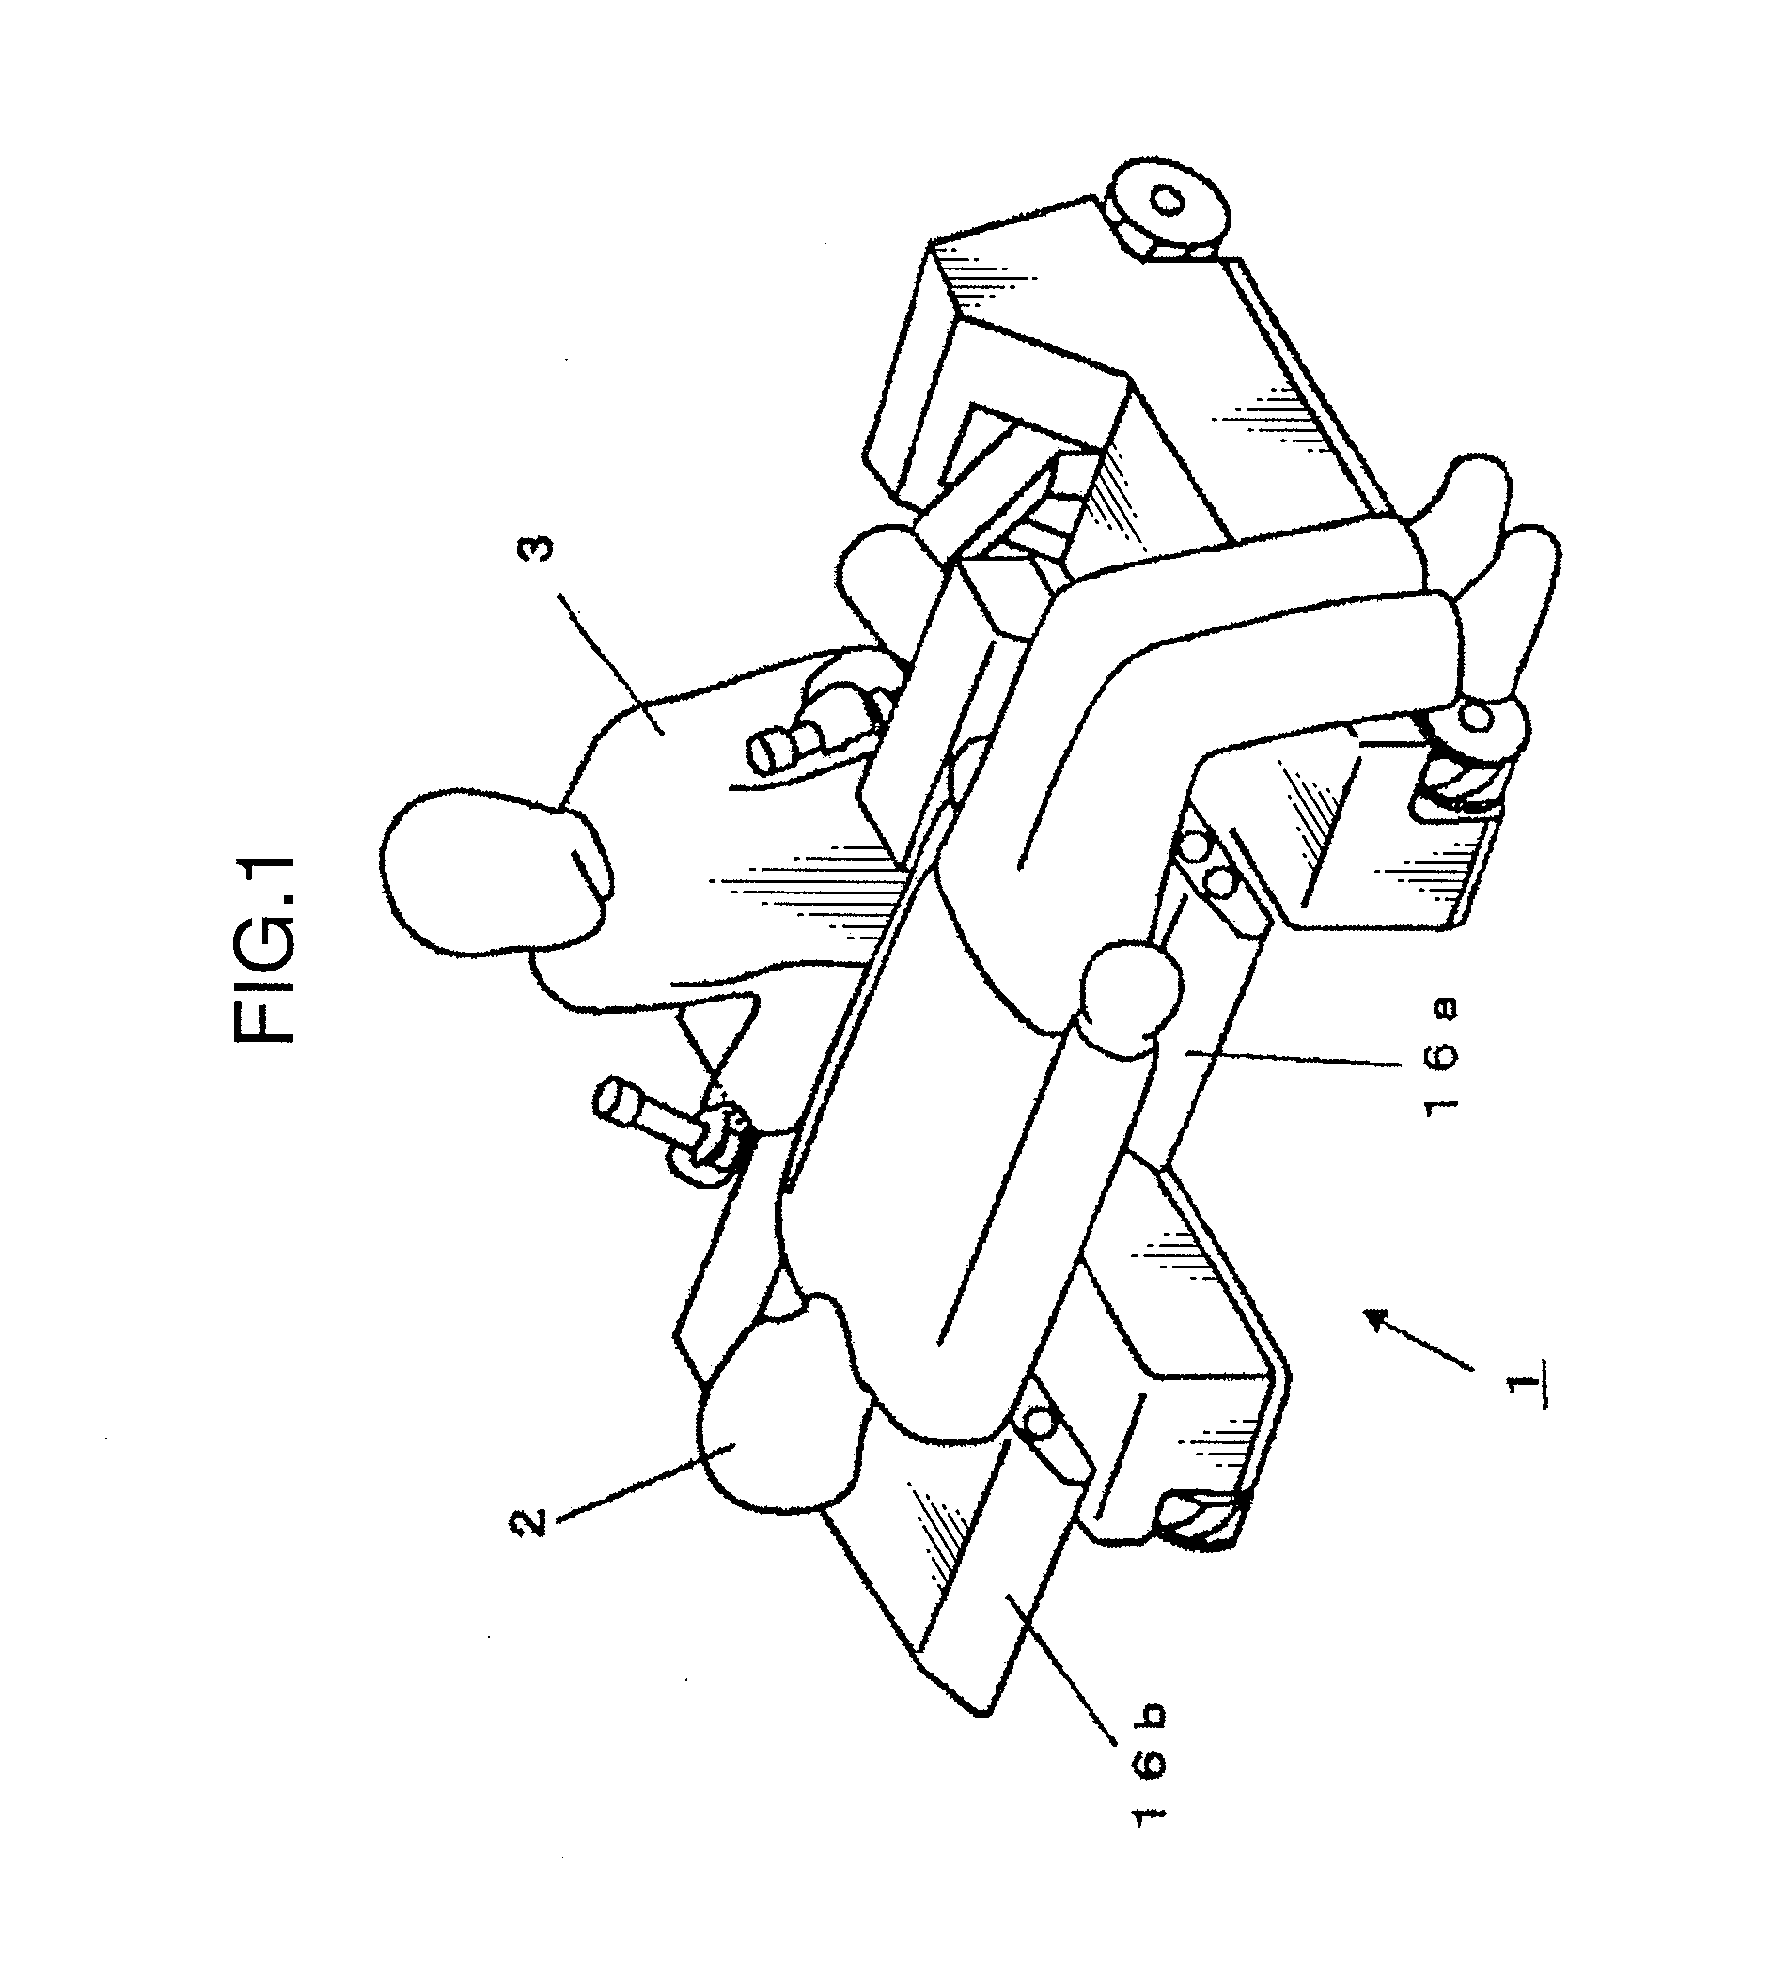 Transfer supporting apparatus